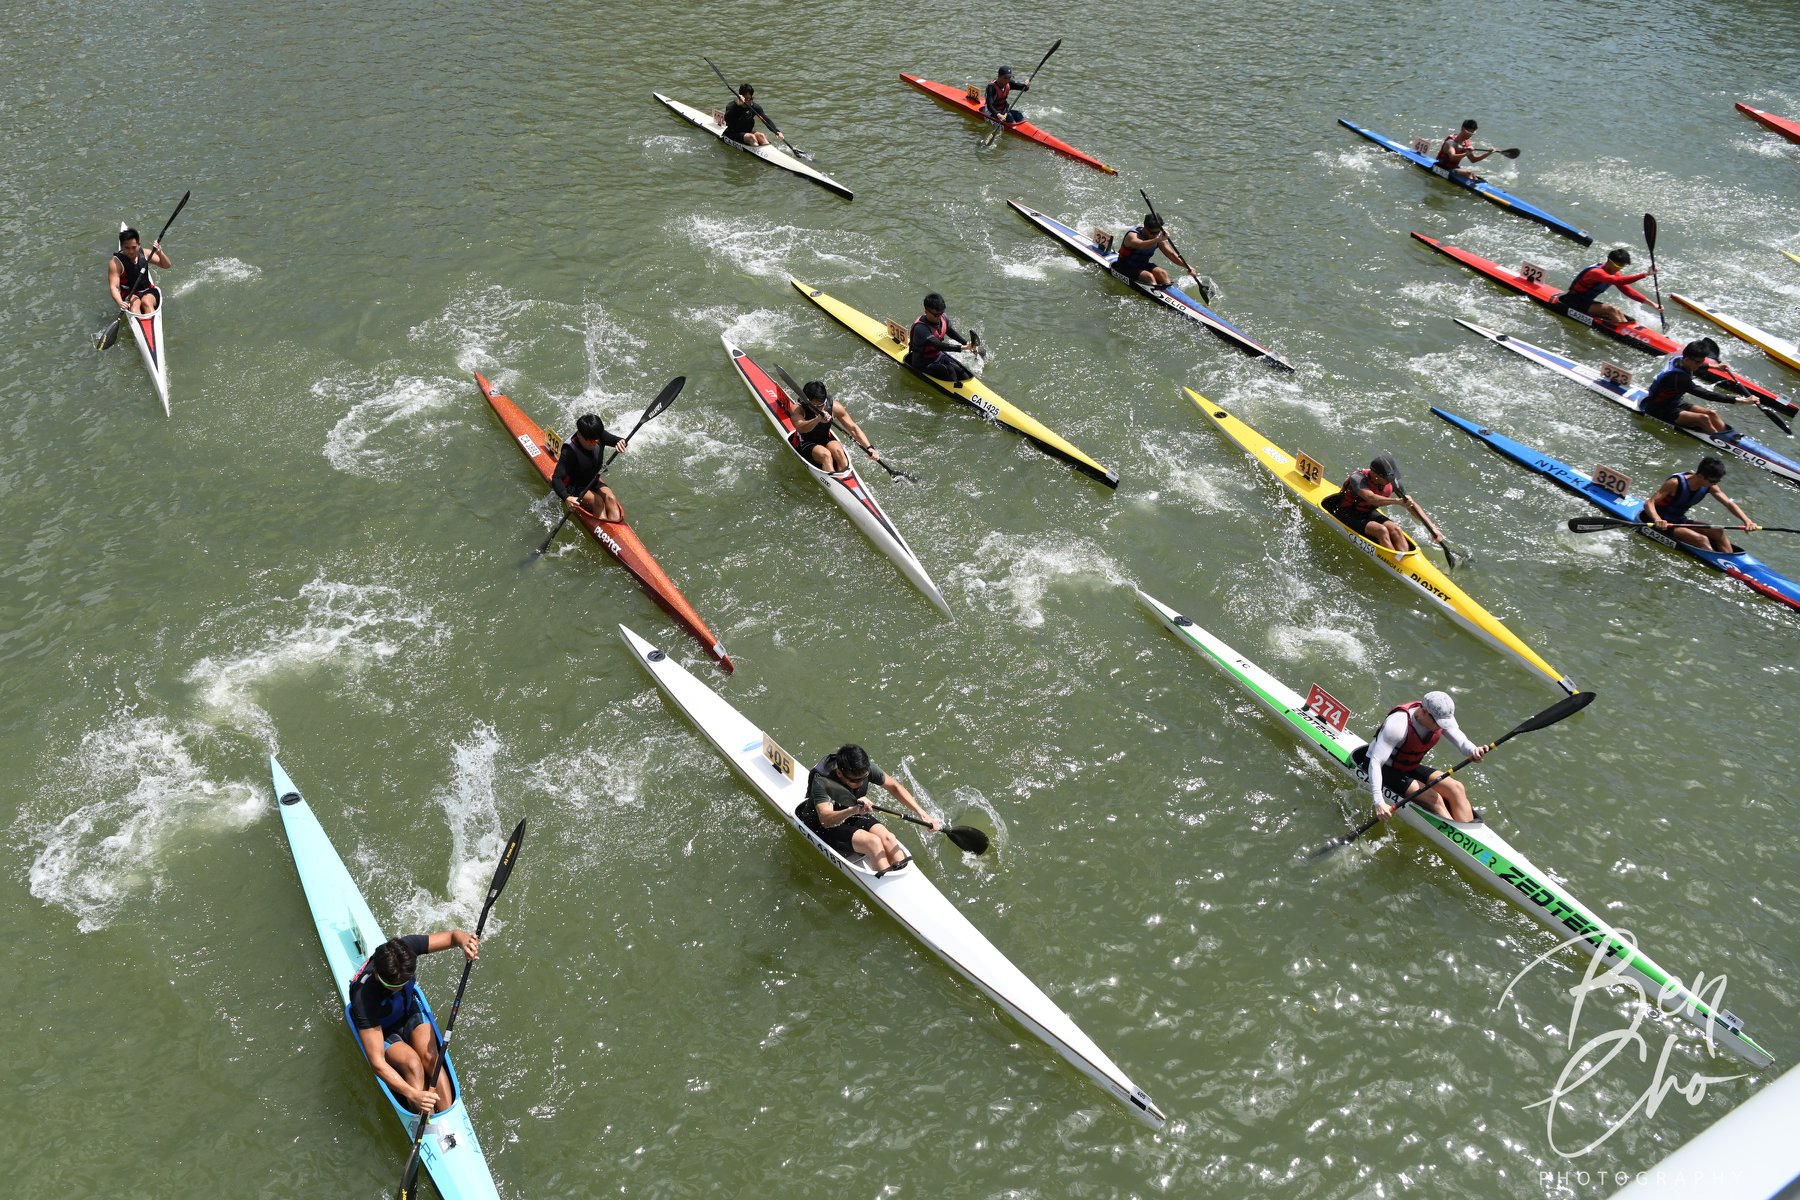 2022 Singapore Sprint Cup 2 & Selections for 2022 ICF Junior & U23 Canoe Sprint World Championships - Cancelled